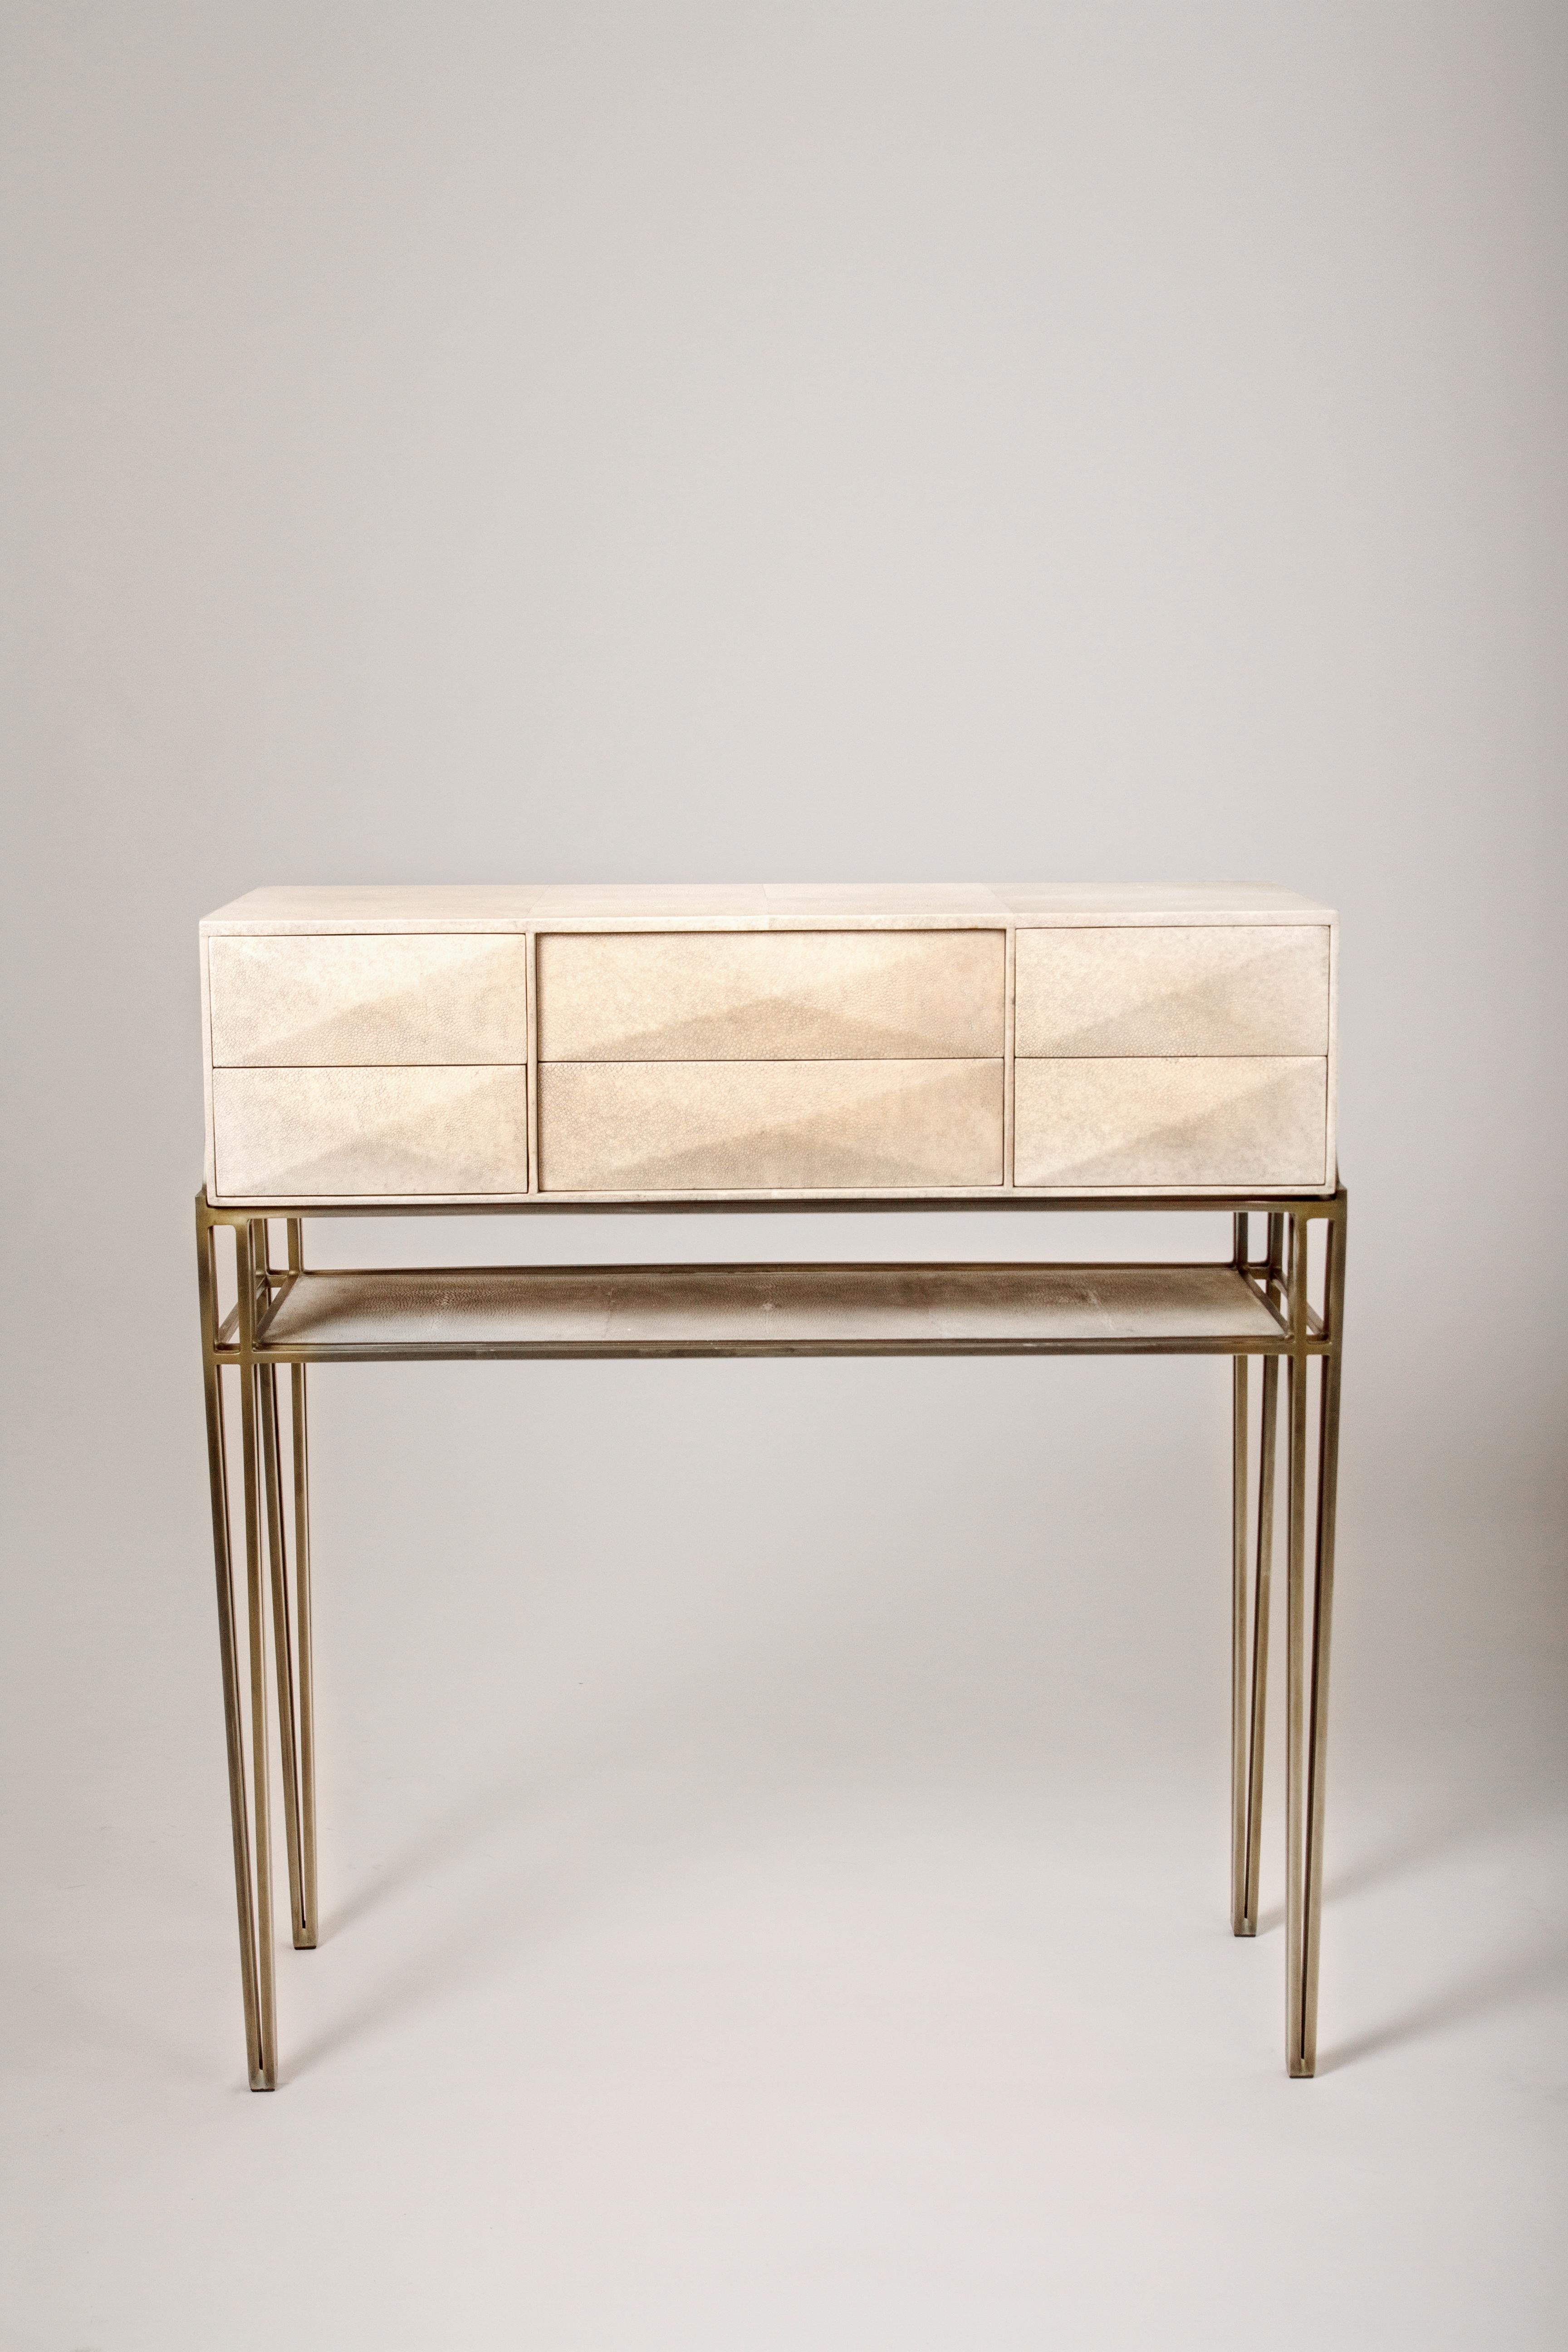 The Cosima 8 console is an updated version of the Cosima 7 console (see image at end of slide). This console inlaid in cream shagreen includes 6 beveled push-through geometric drawers that can used to store anything from jewelry to stationary. This